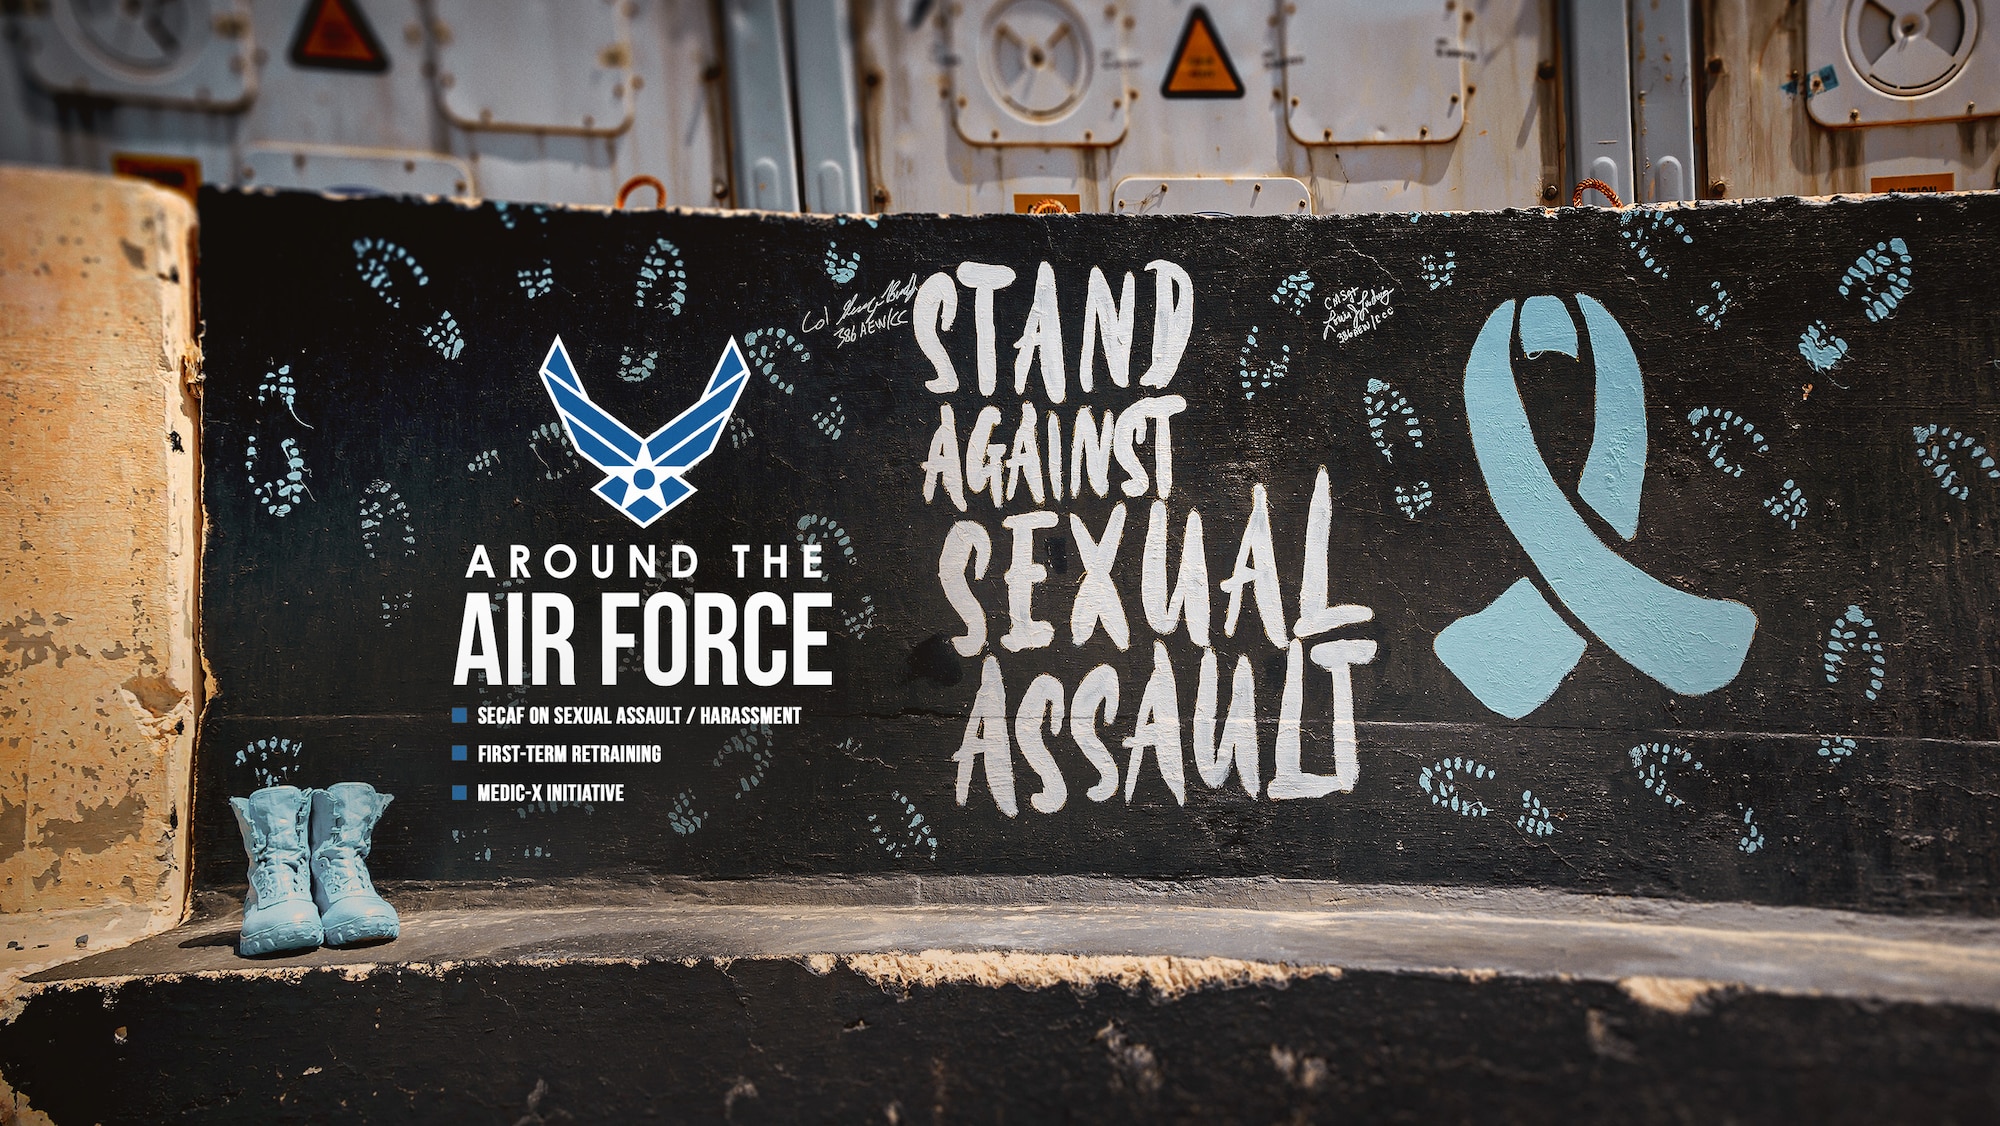 Around the Air Force SECAF on Sexual Assault, Harassment - First-term Retraining